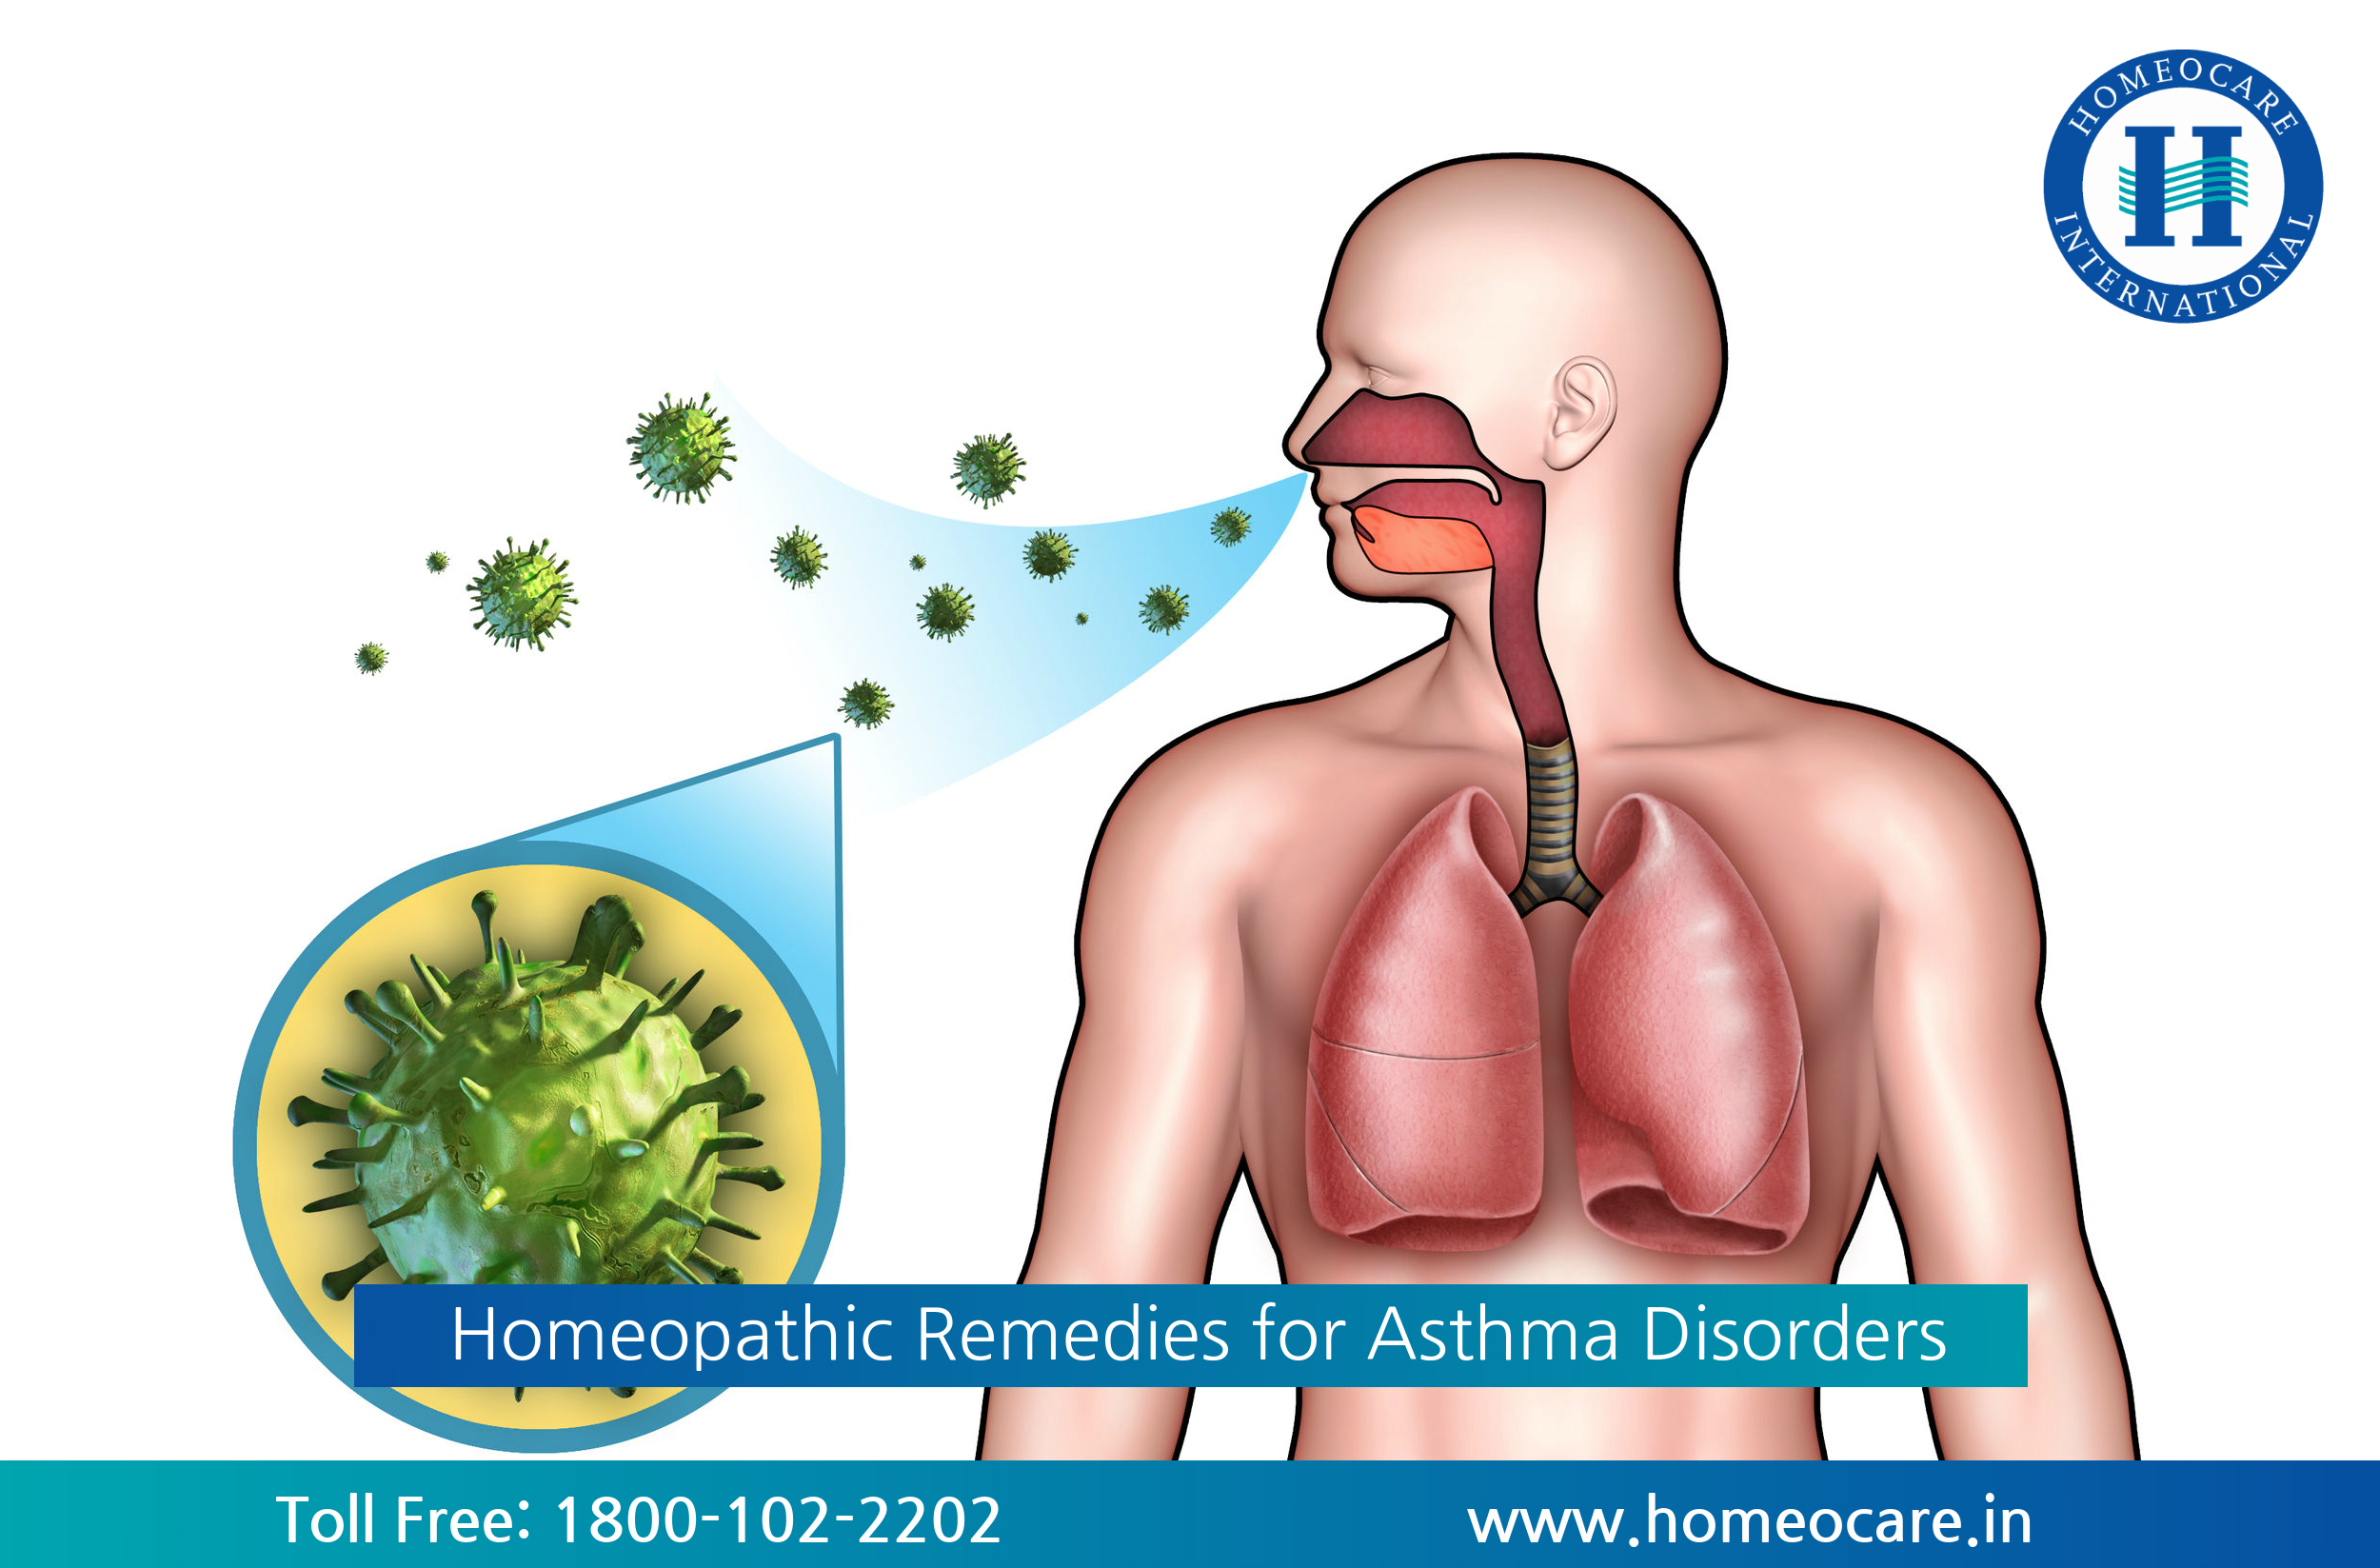 Homeopathic treatment for Asthma Disorders